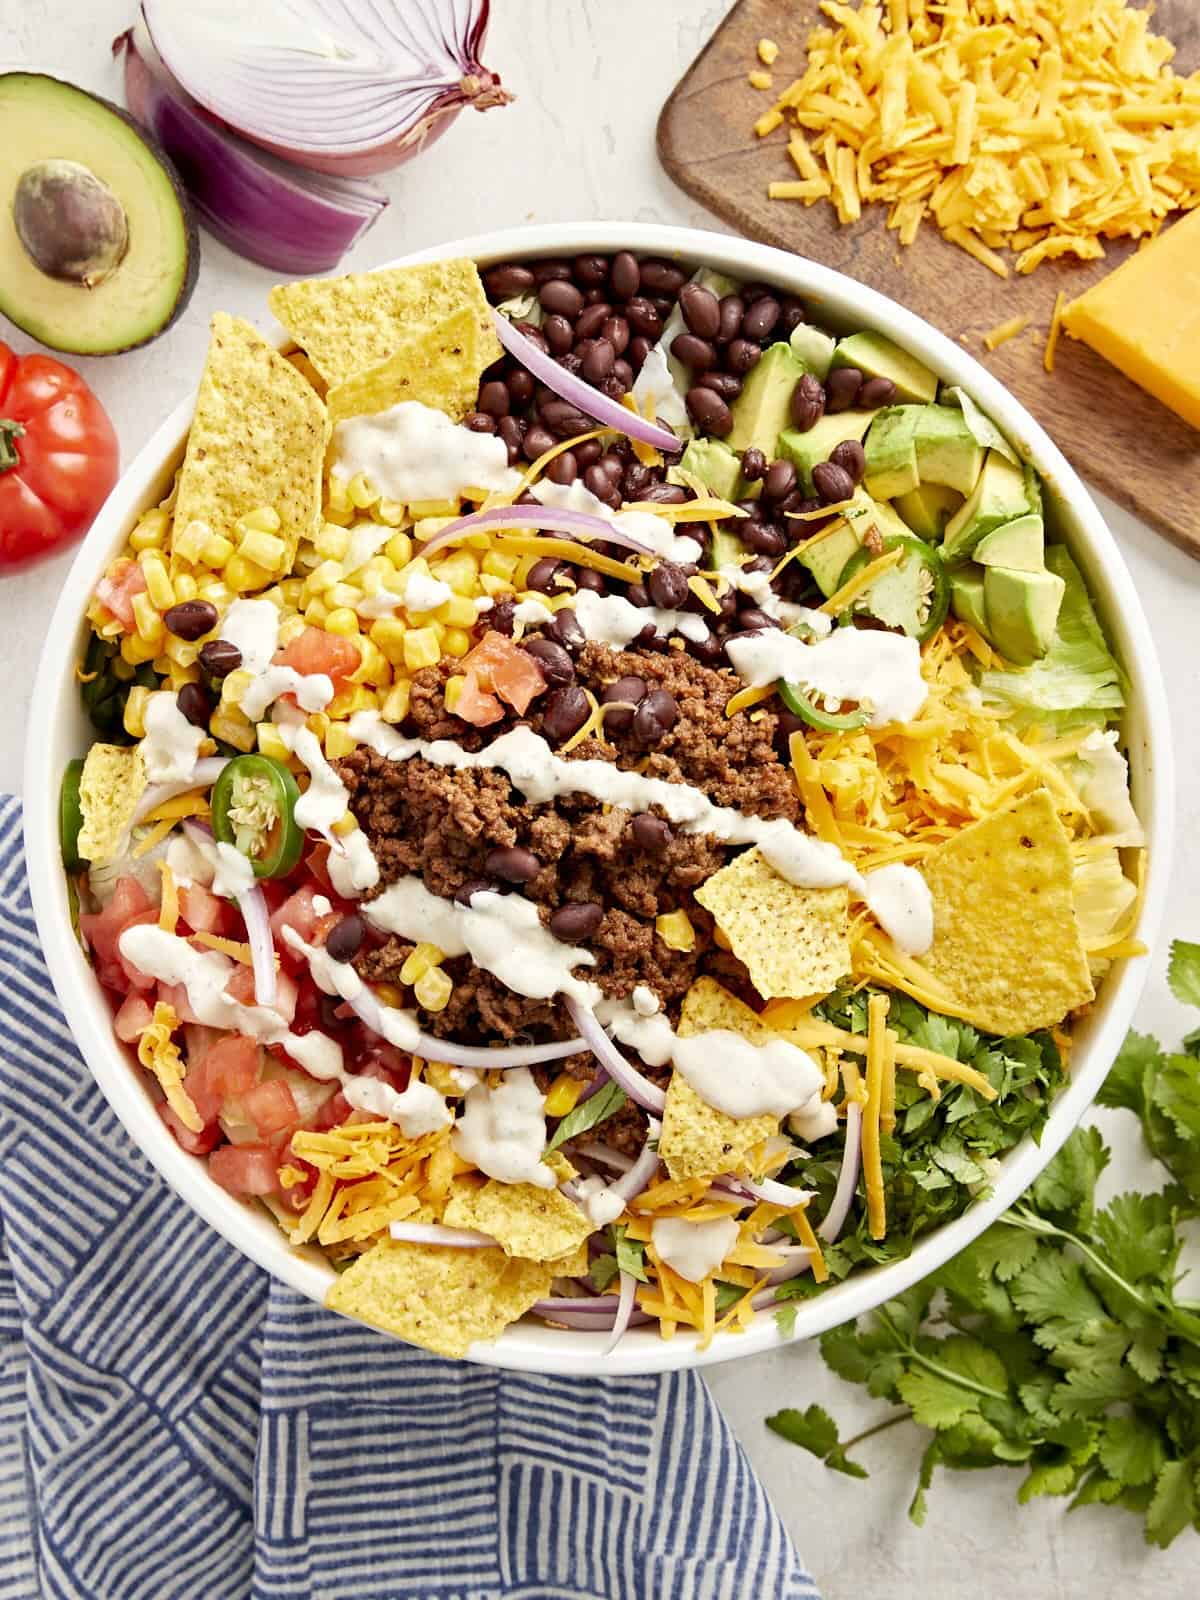 Top view of taco salad with creamy white dressing and corn chips in a white bowl.